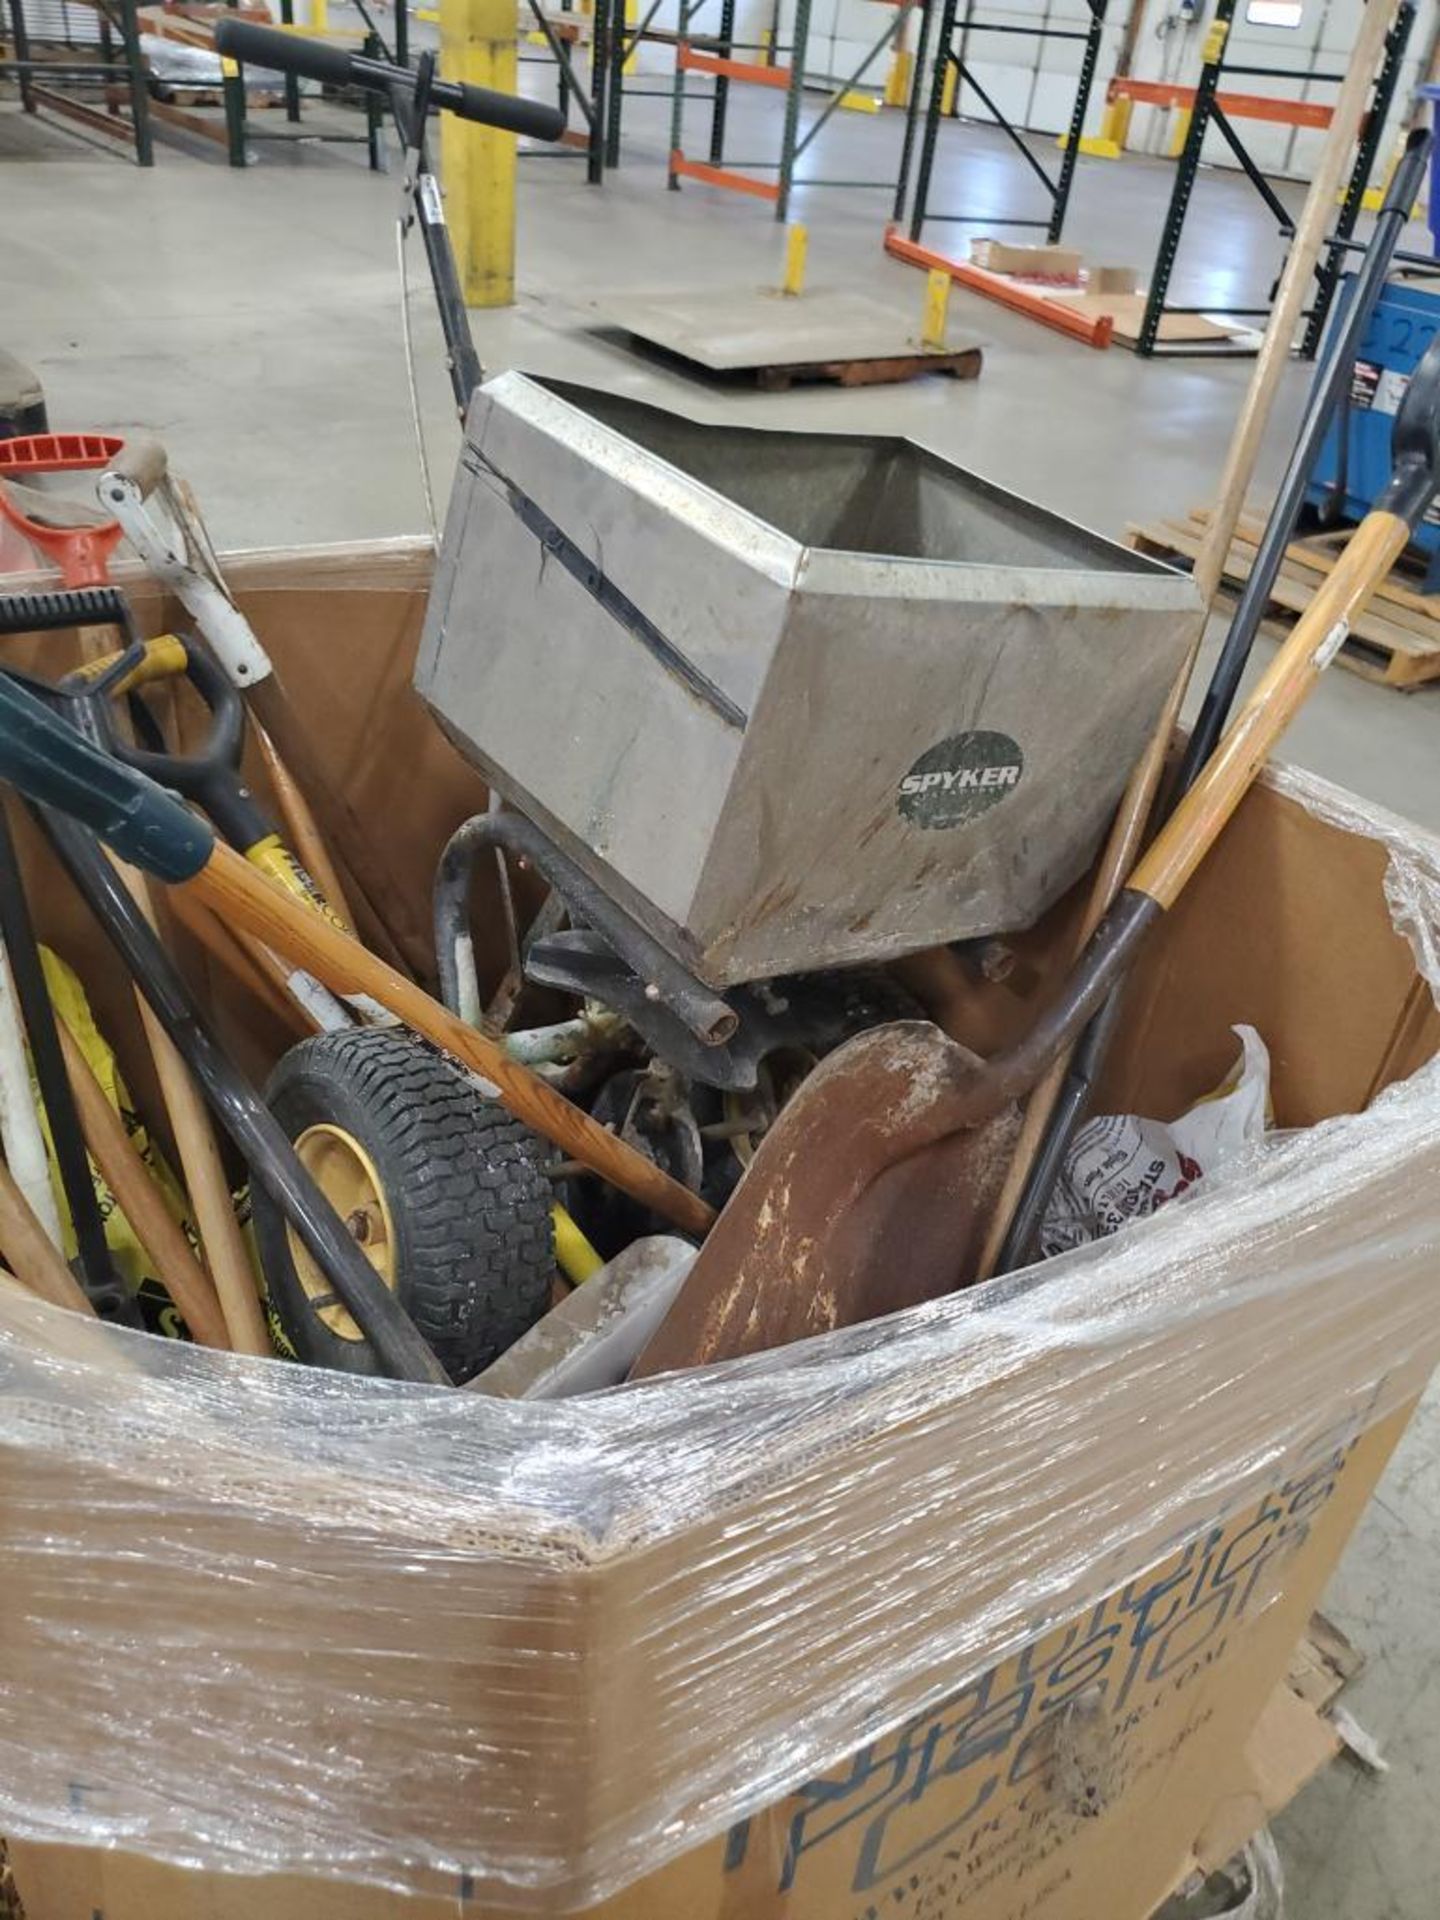 BOX OF ASSORTED BROOMS, SHOVELS, AND SPYKER SEED SPREADER ***END LOCATION: 13000 DARICE PKWY, - Image 2 of 2